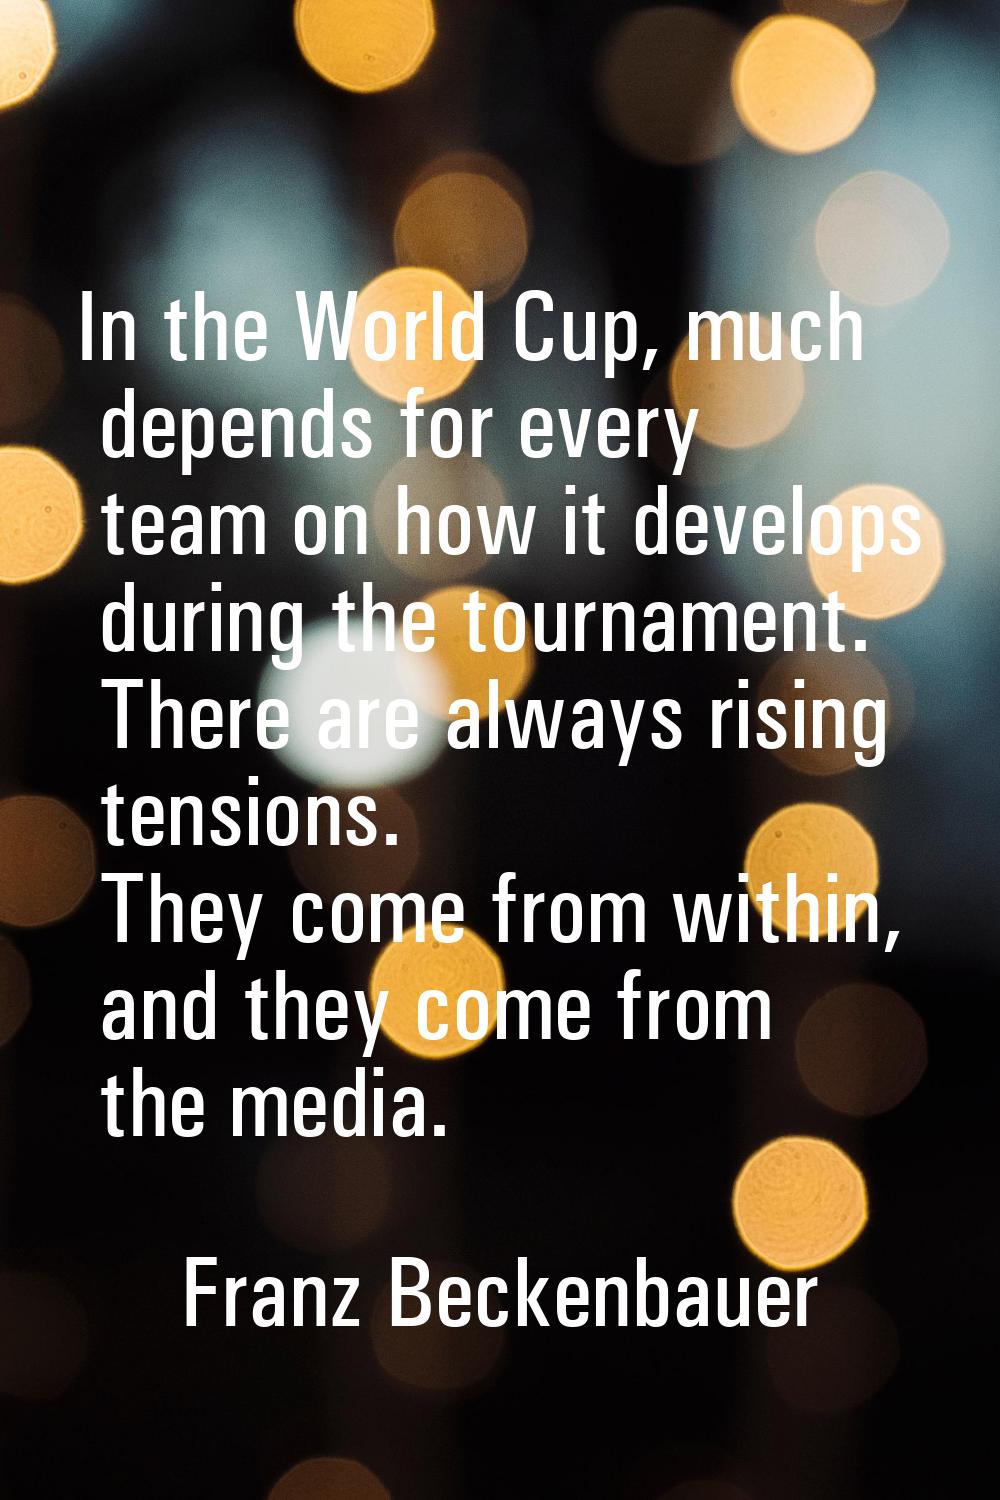 In the World Cup, much depends for every team on how it develops during the tournament. There are a